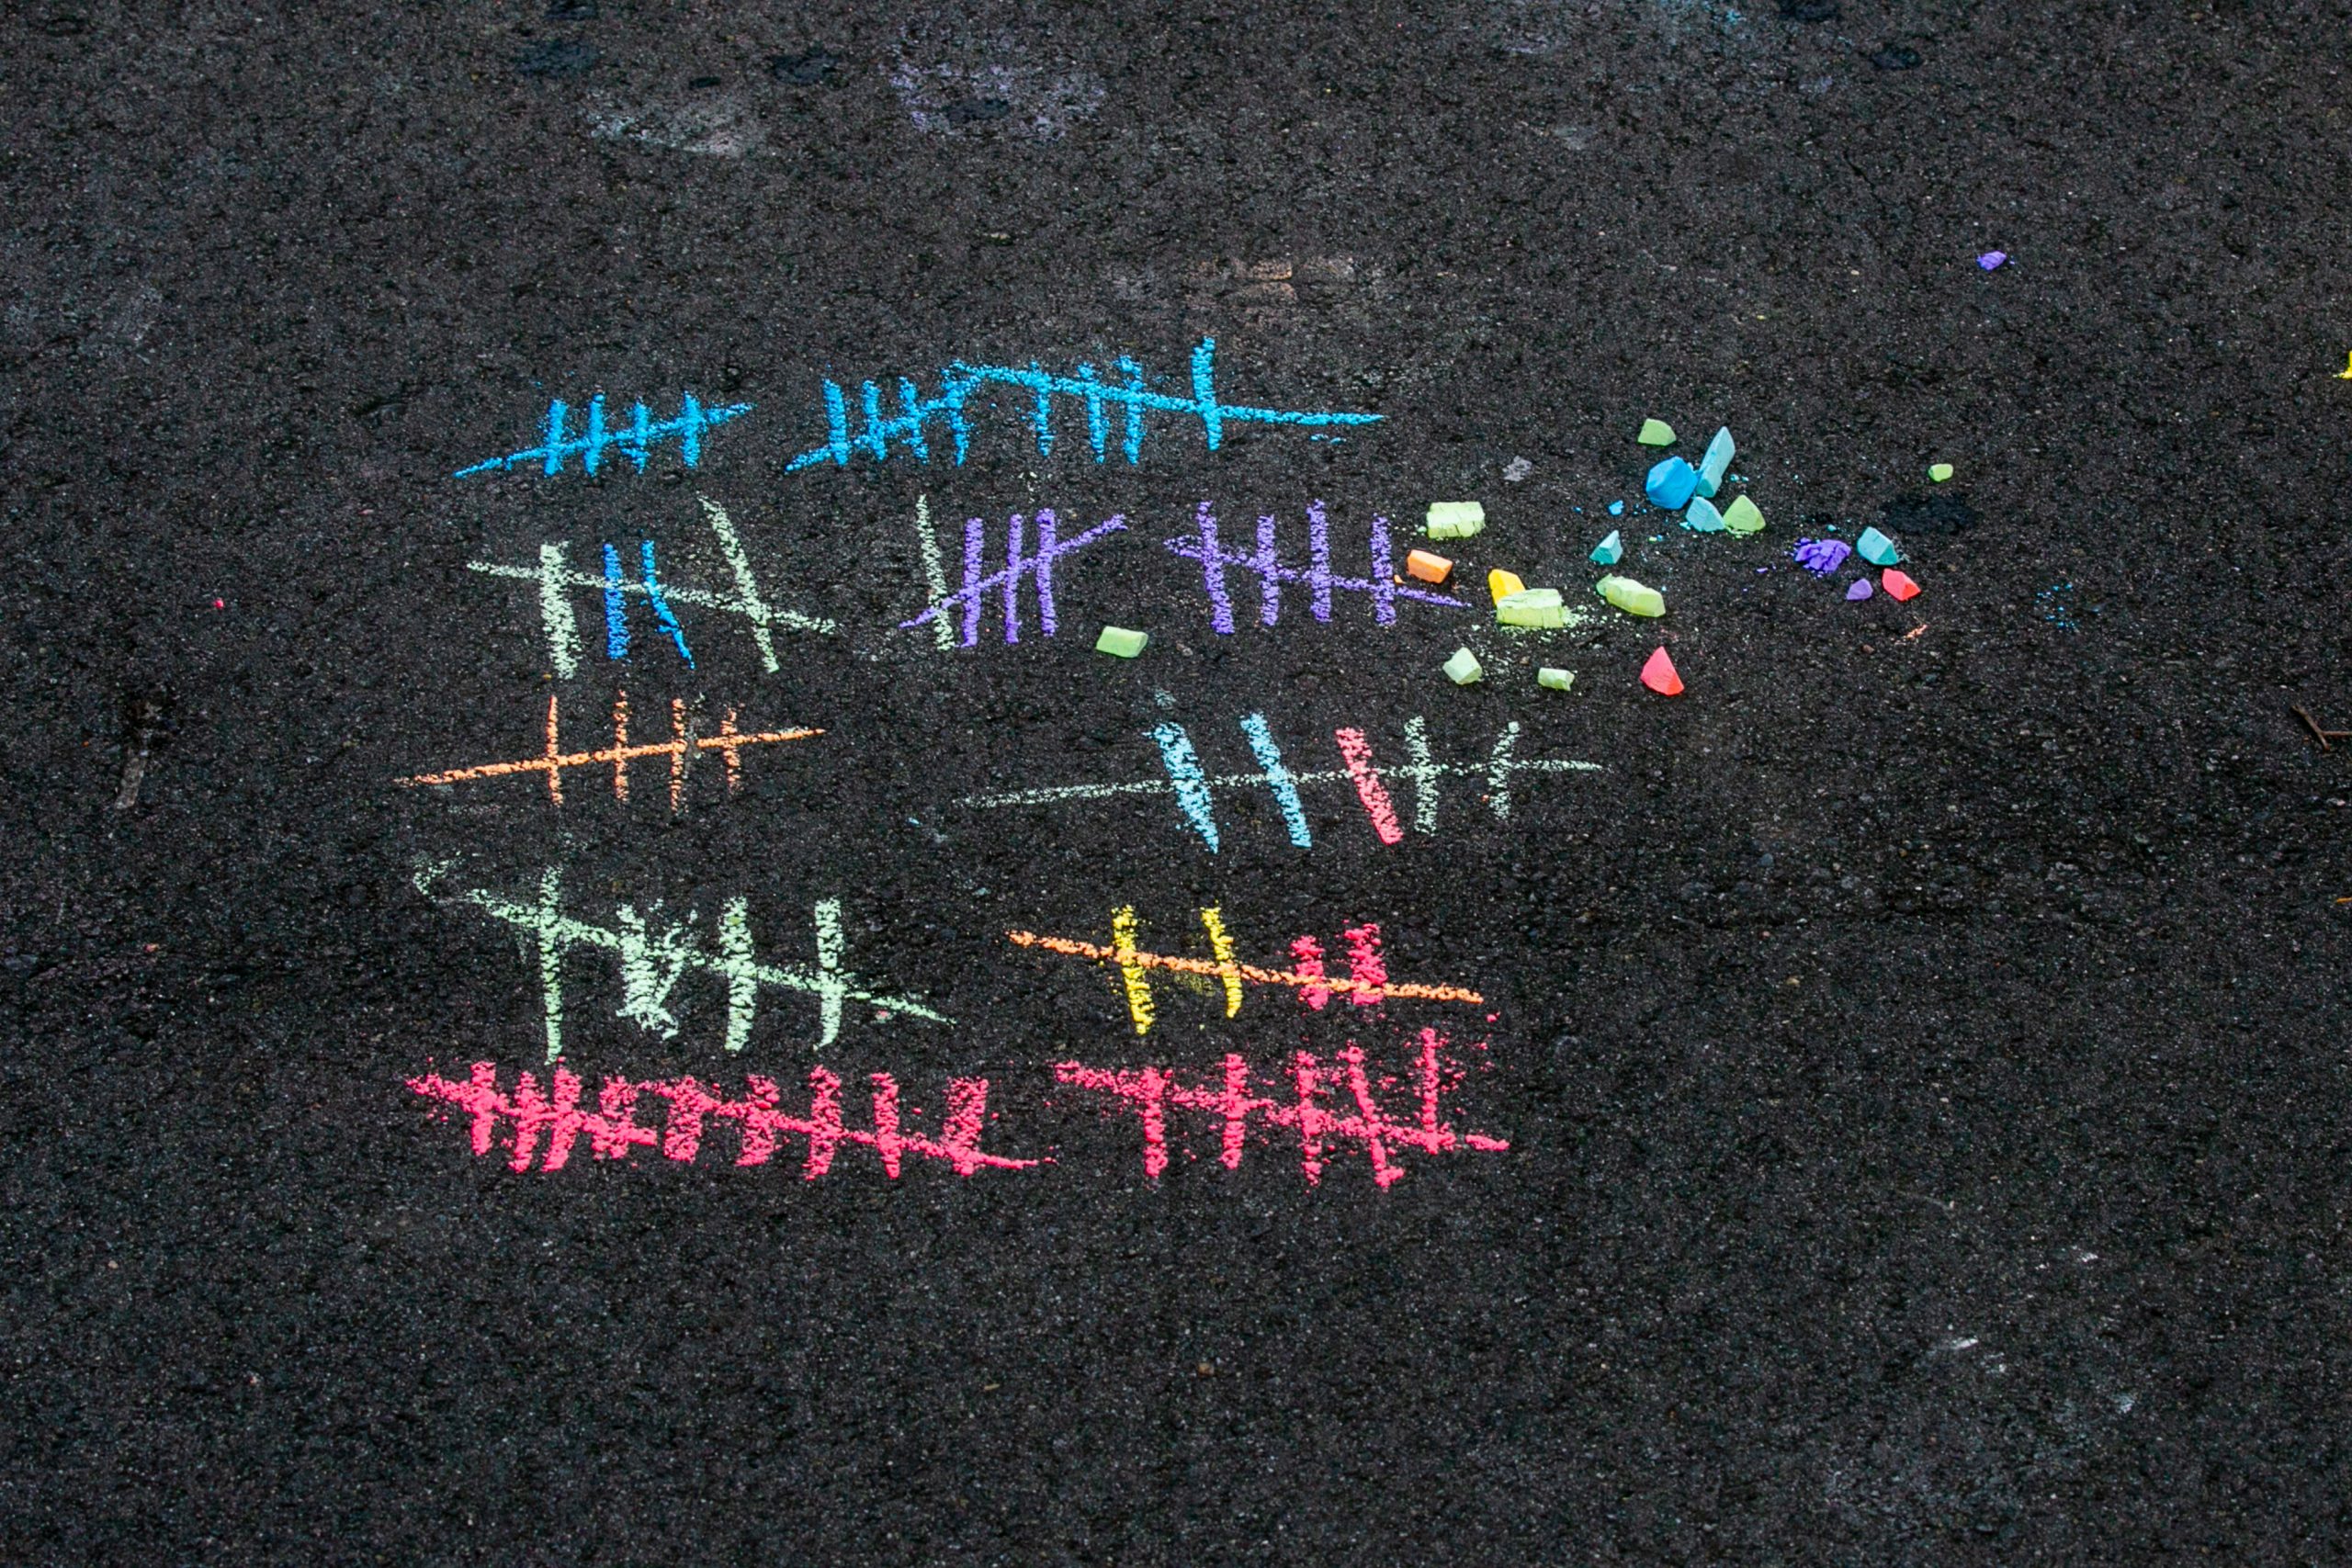 A running tally of hash marks keep track of the number of pieces of chalk we used while creating the mural.